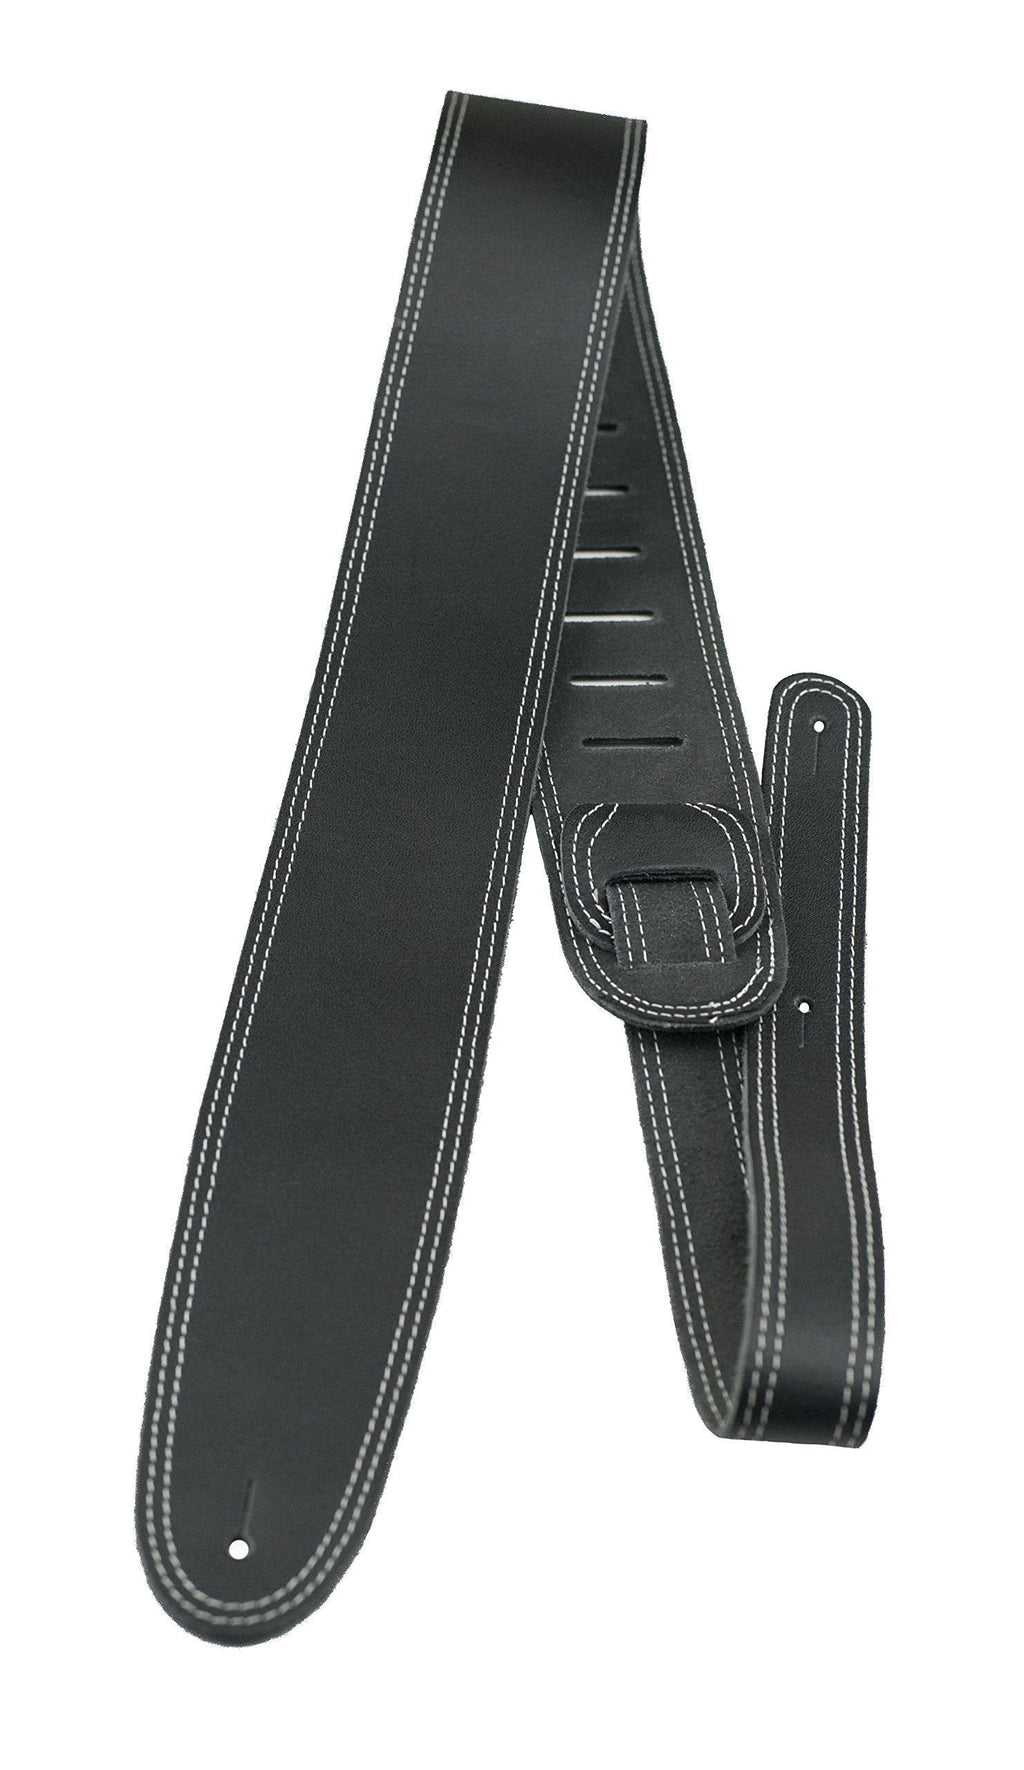 Perri's Leathers Double Stitched Leather Guitar Strap, 2.5” inches Wide, Adjustable Length 43" to 56" inches, Black